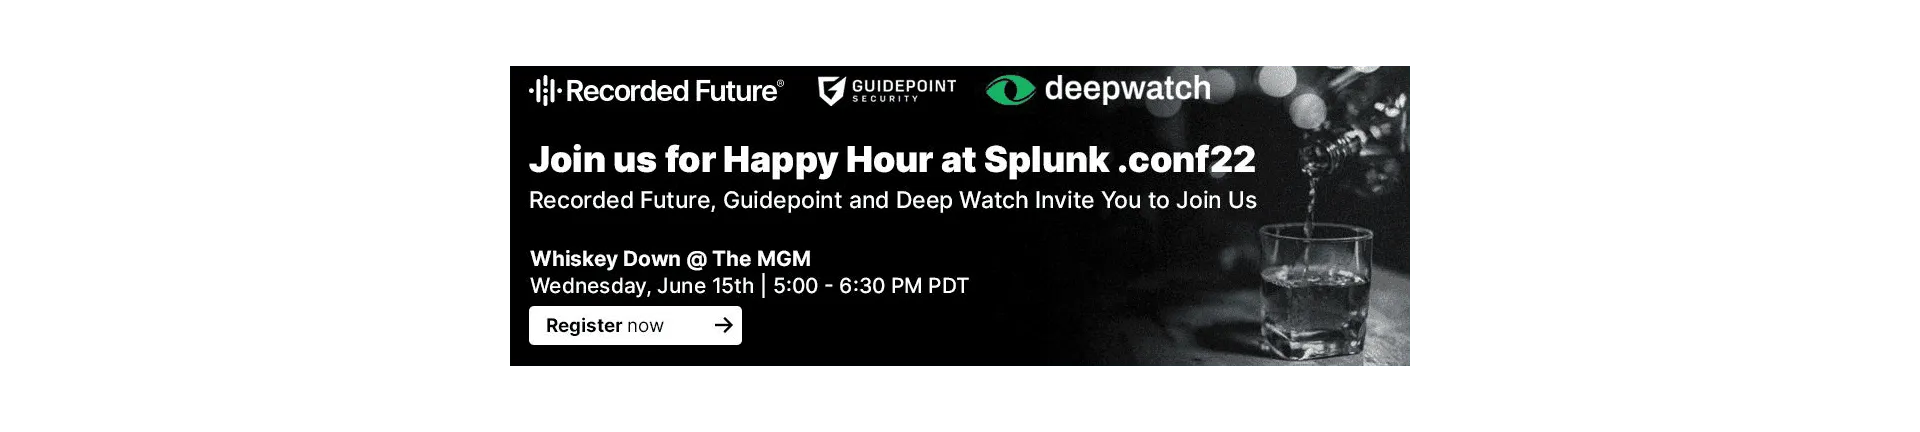 Meet us for Happy Hour at Splunk.conf22